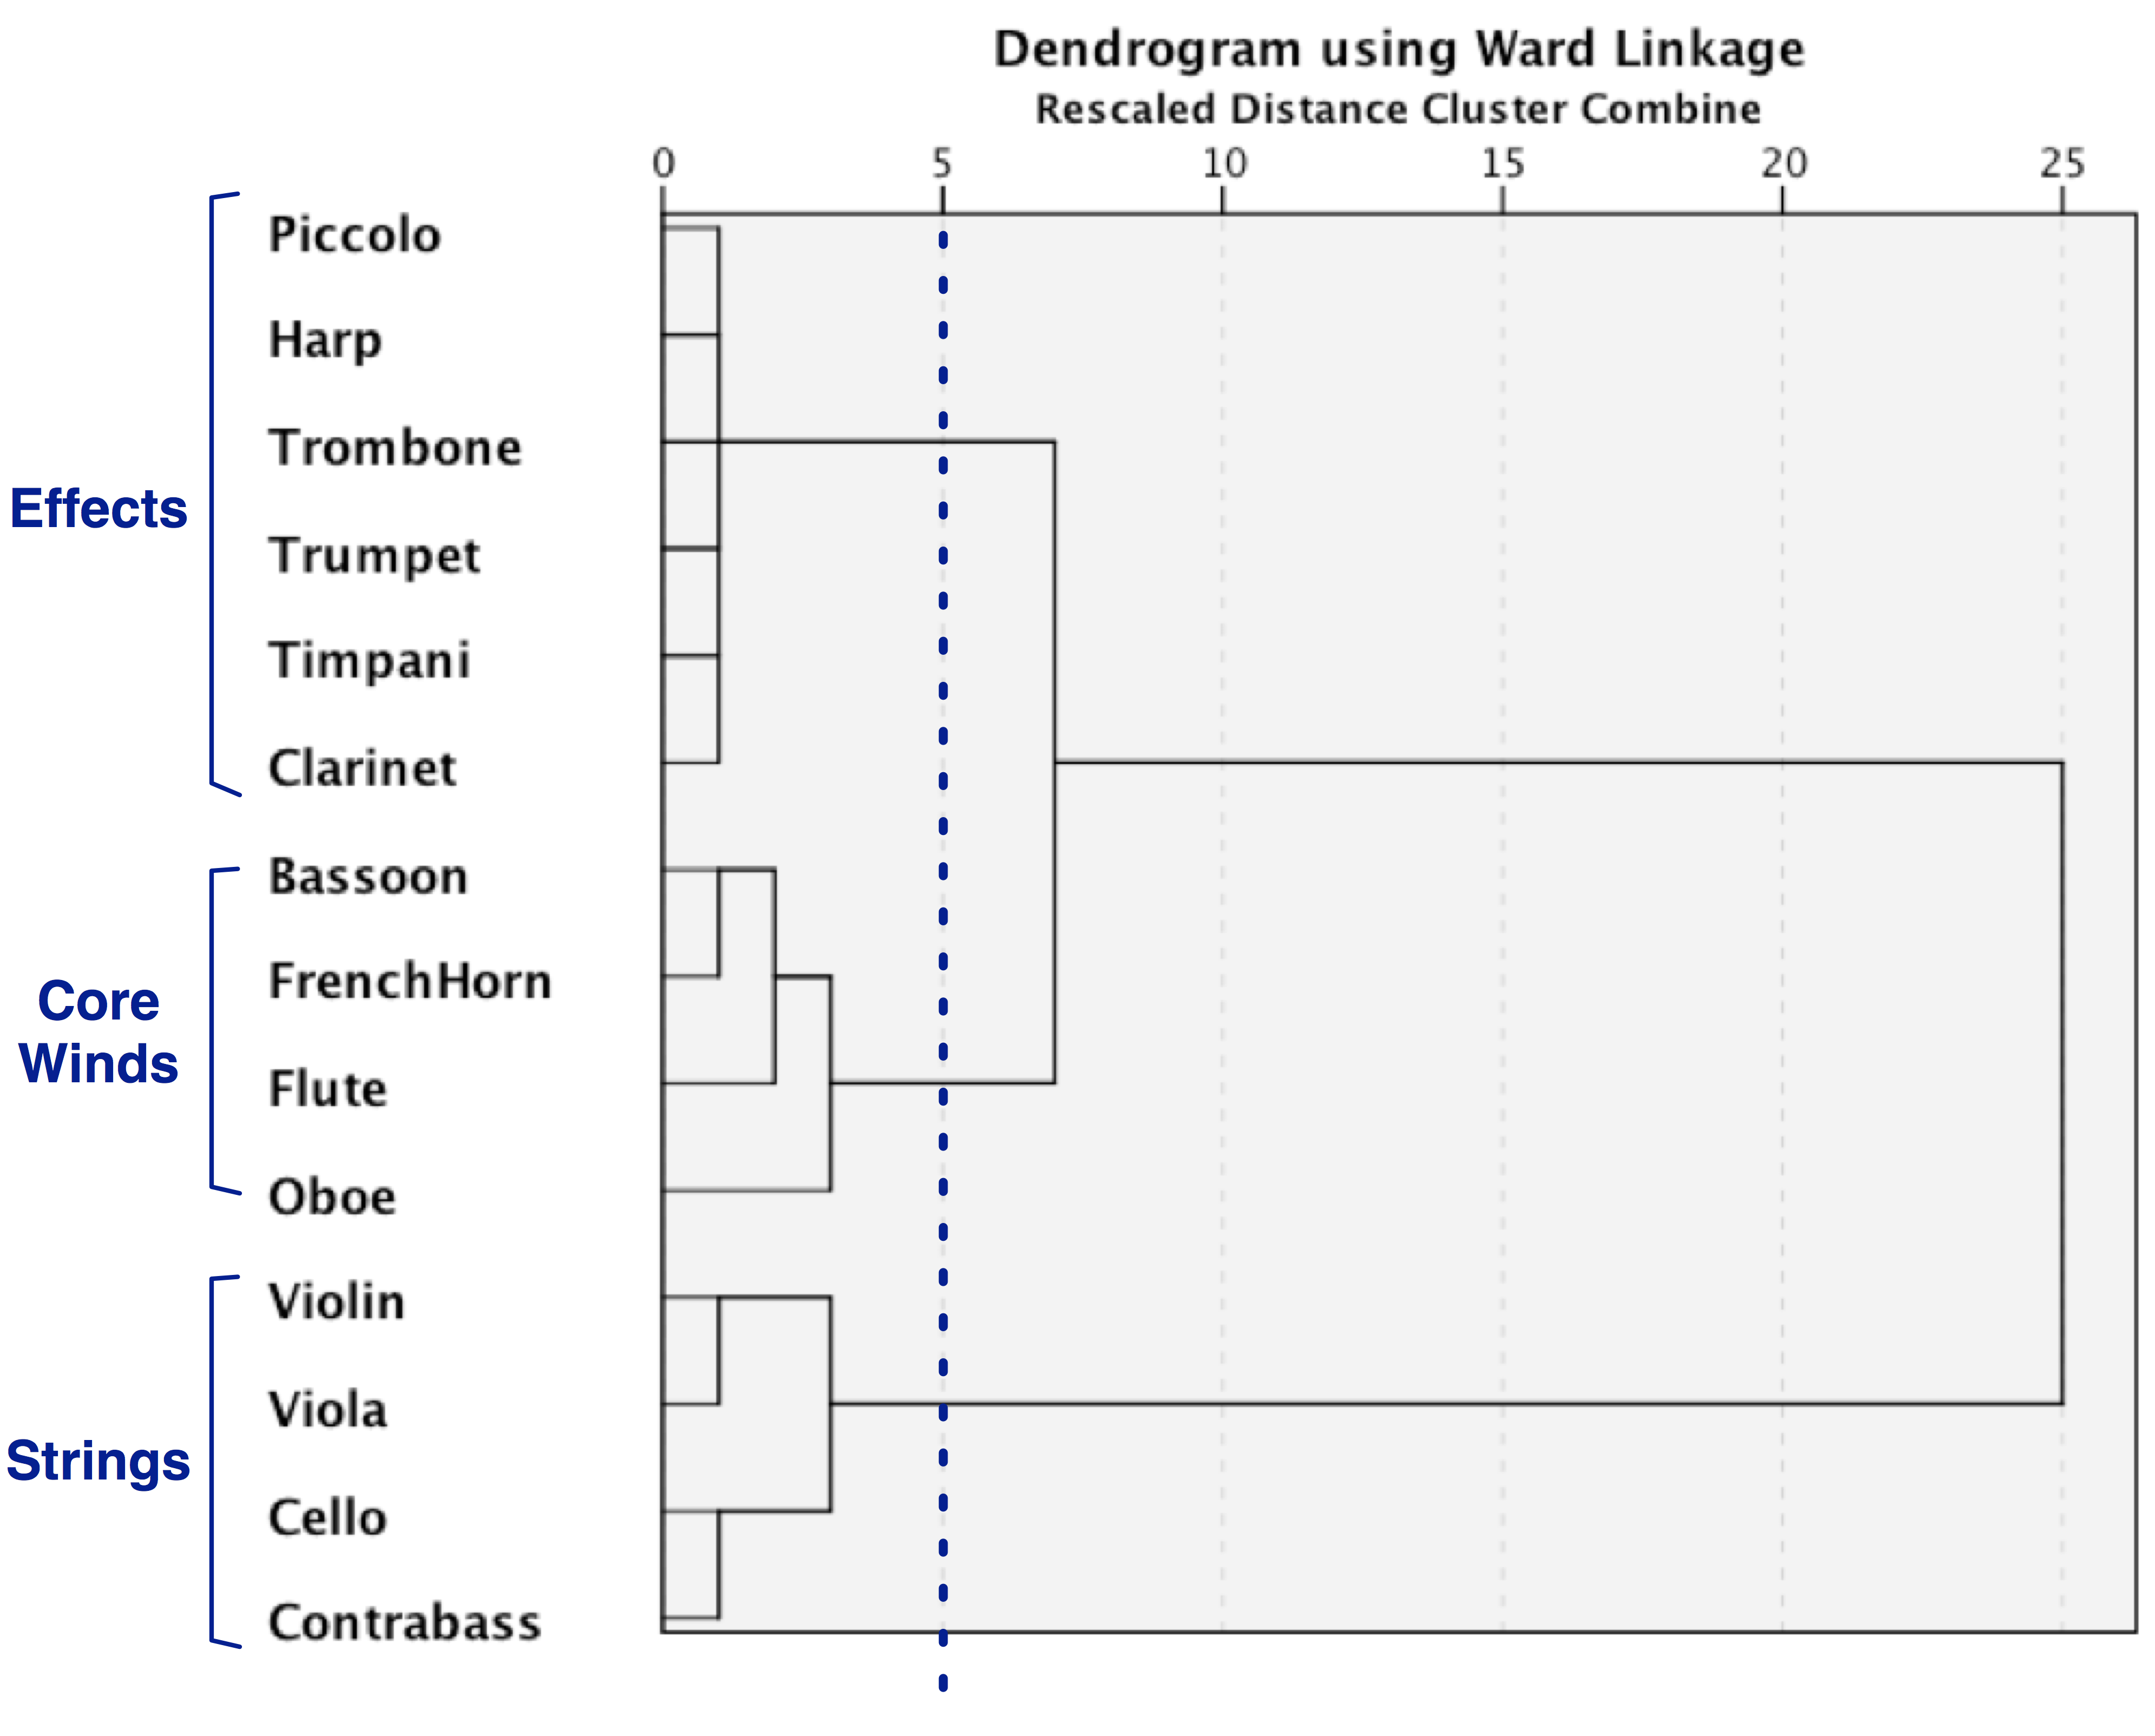 Figure 9 is a dendrogram using Ward Linkage showing hierarchical clustering of typical orchestral instruments in the 18th century